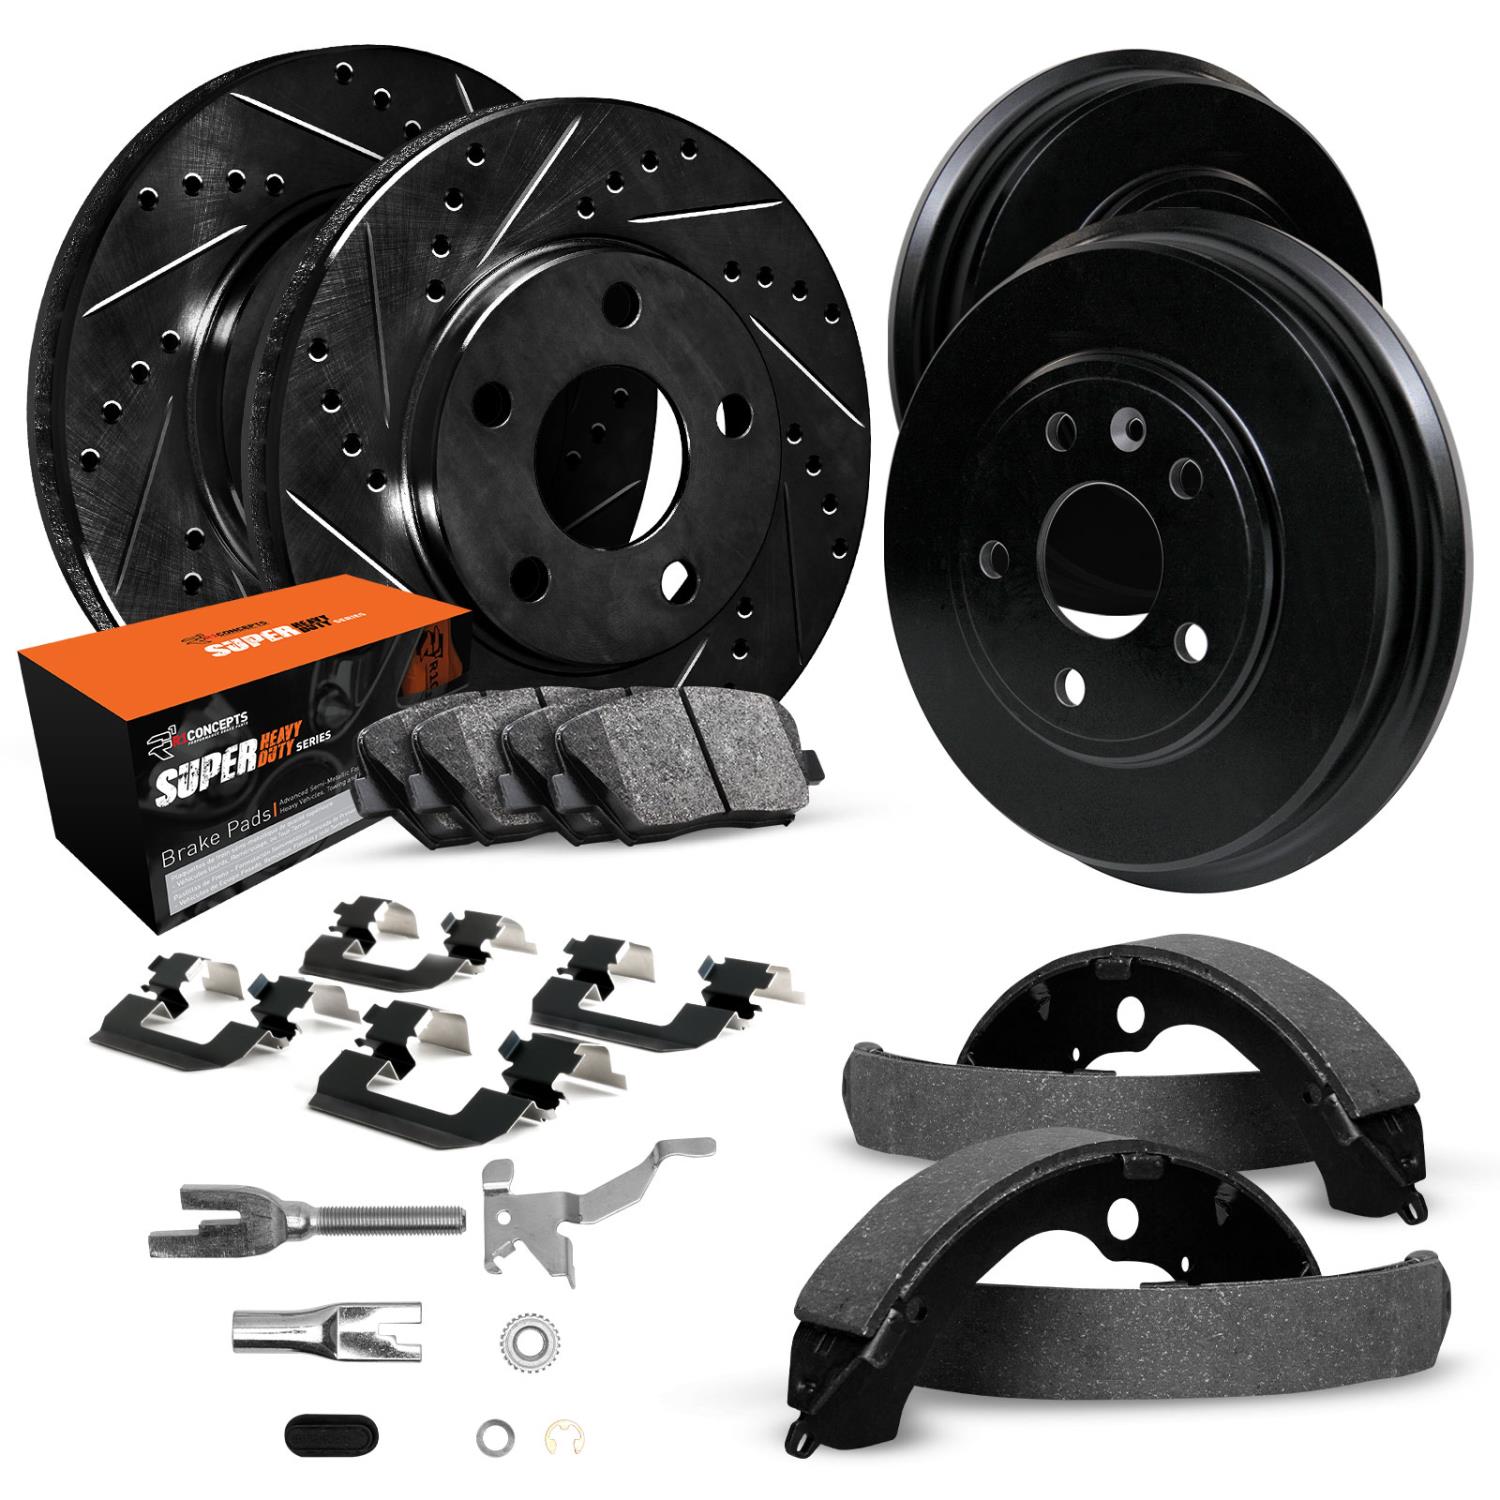 E-Line Drilled/Slotted Black Rotor & Drum Set w/Super-Duty Pads, Shoes, Hardware/Adjusters, 1986-1993 Ford/Lincoln/Mercury/Mazda